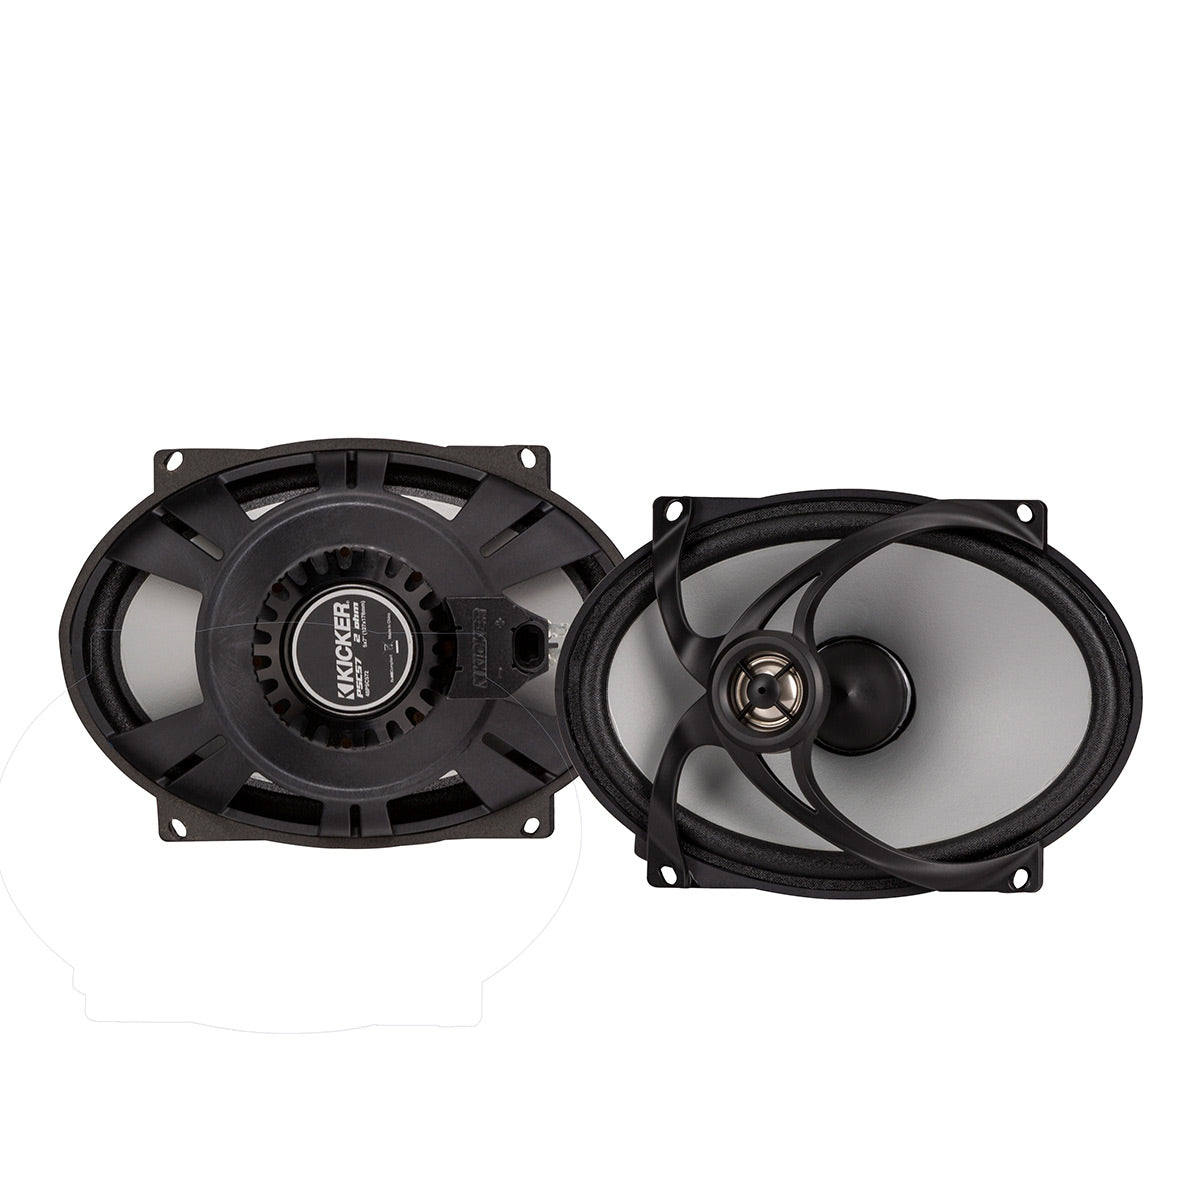 Kicker PS 5 x 7" Replacement 2-Way Coaxial 4 ohm Weather-Proof Speakers for 2006 and Newer Harley Davidson - Pair